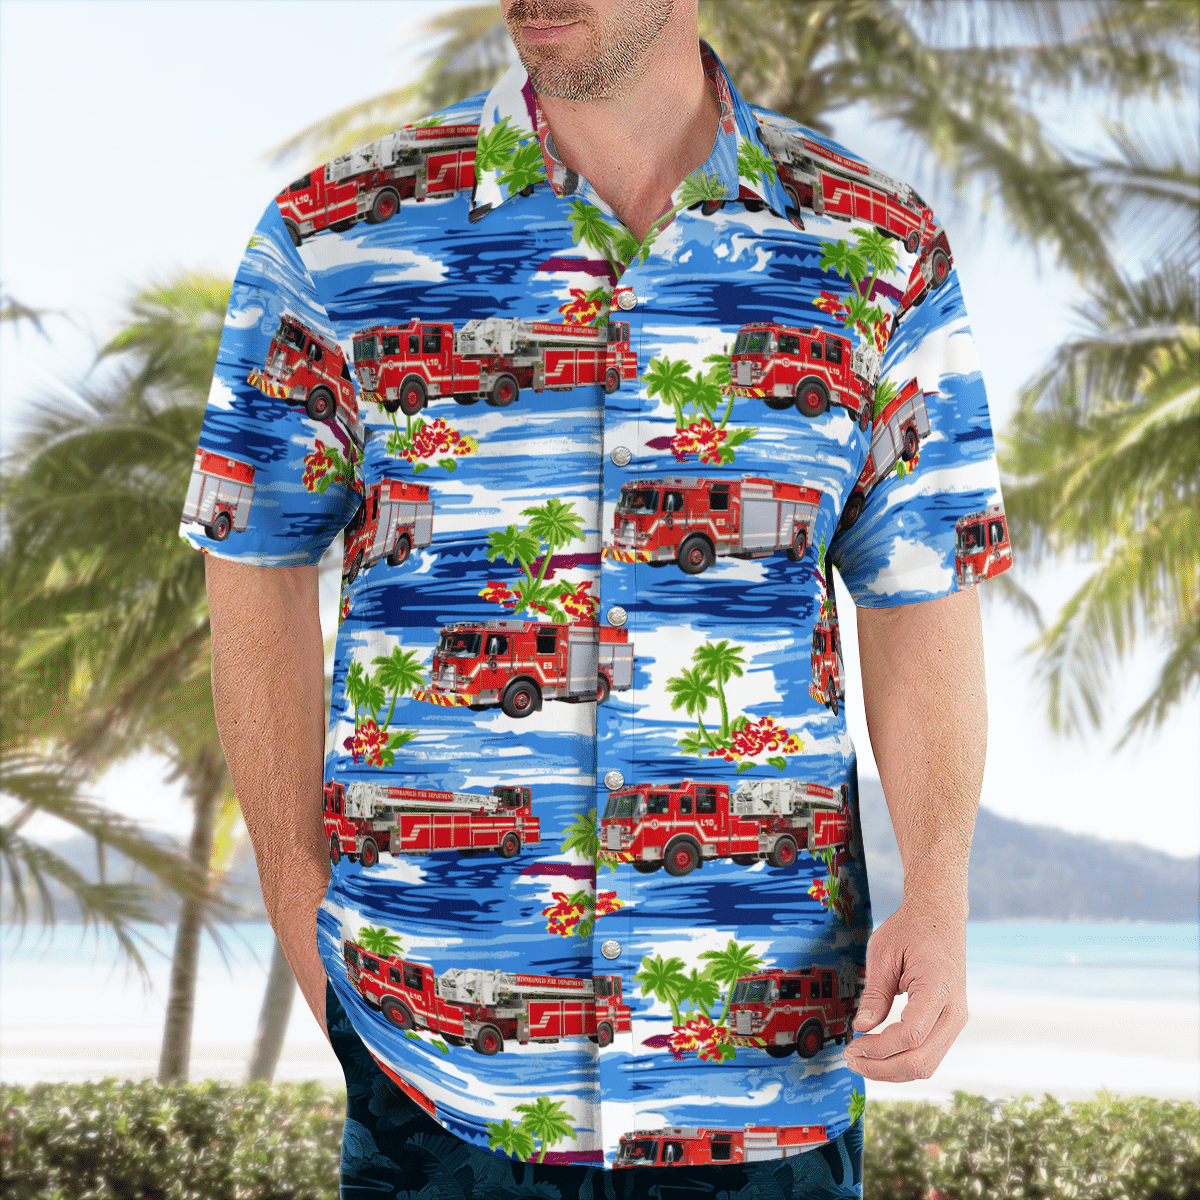 There are several styles of beach and Hawaiian shorts and tops to choose from 161